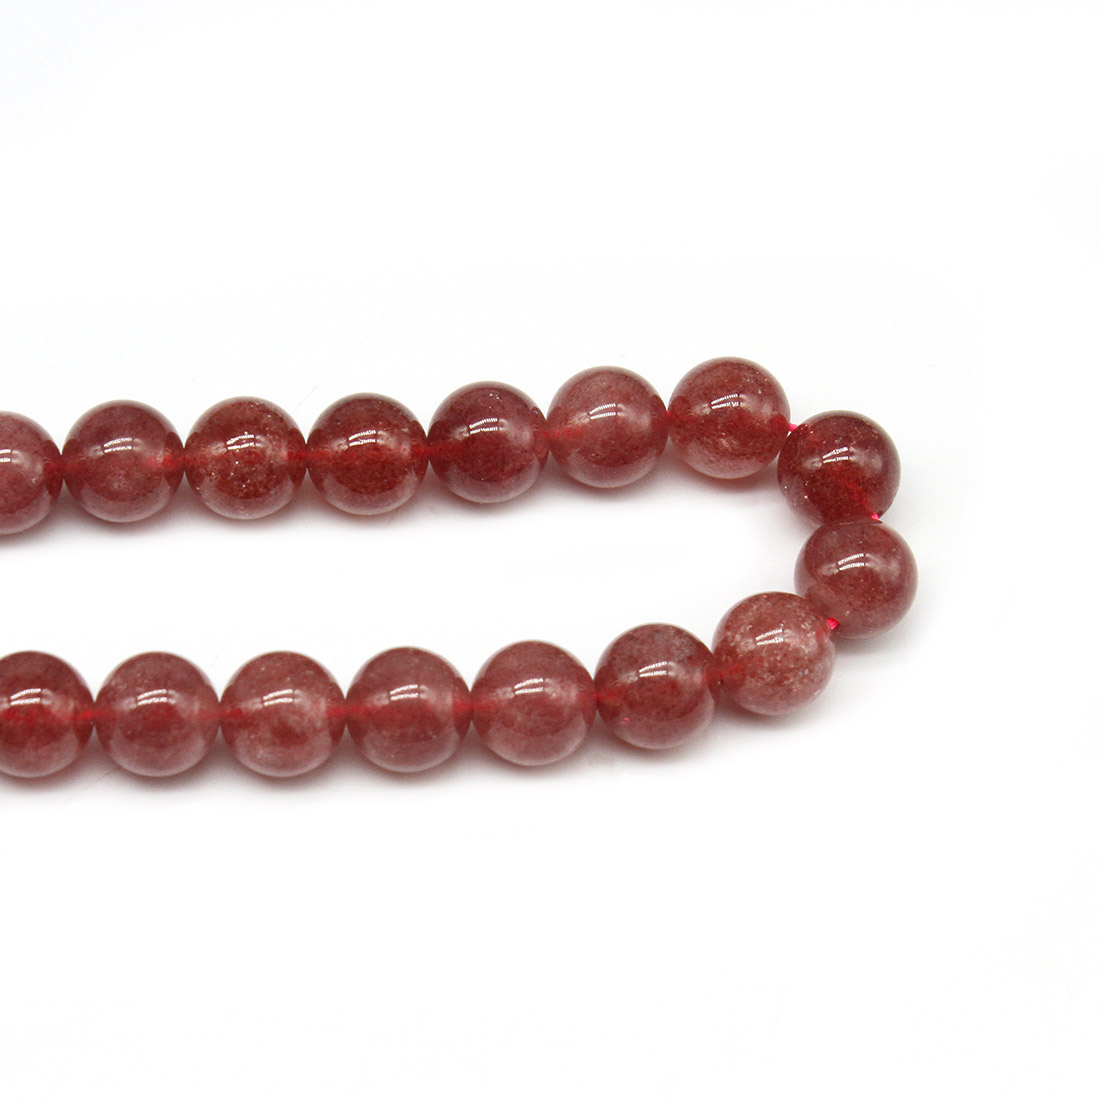 6 mm watermelon red